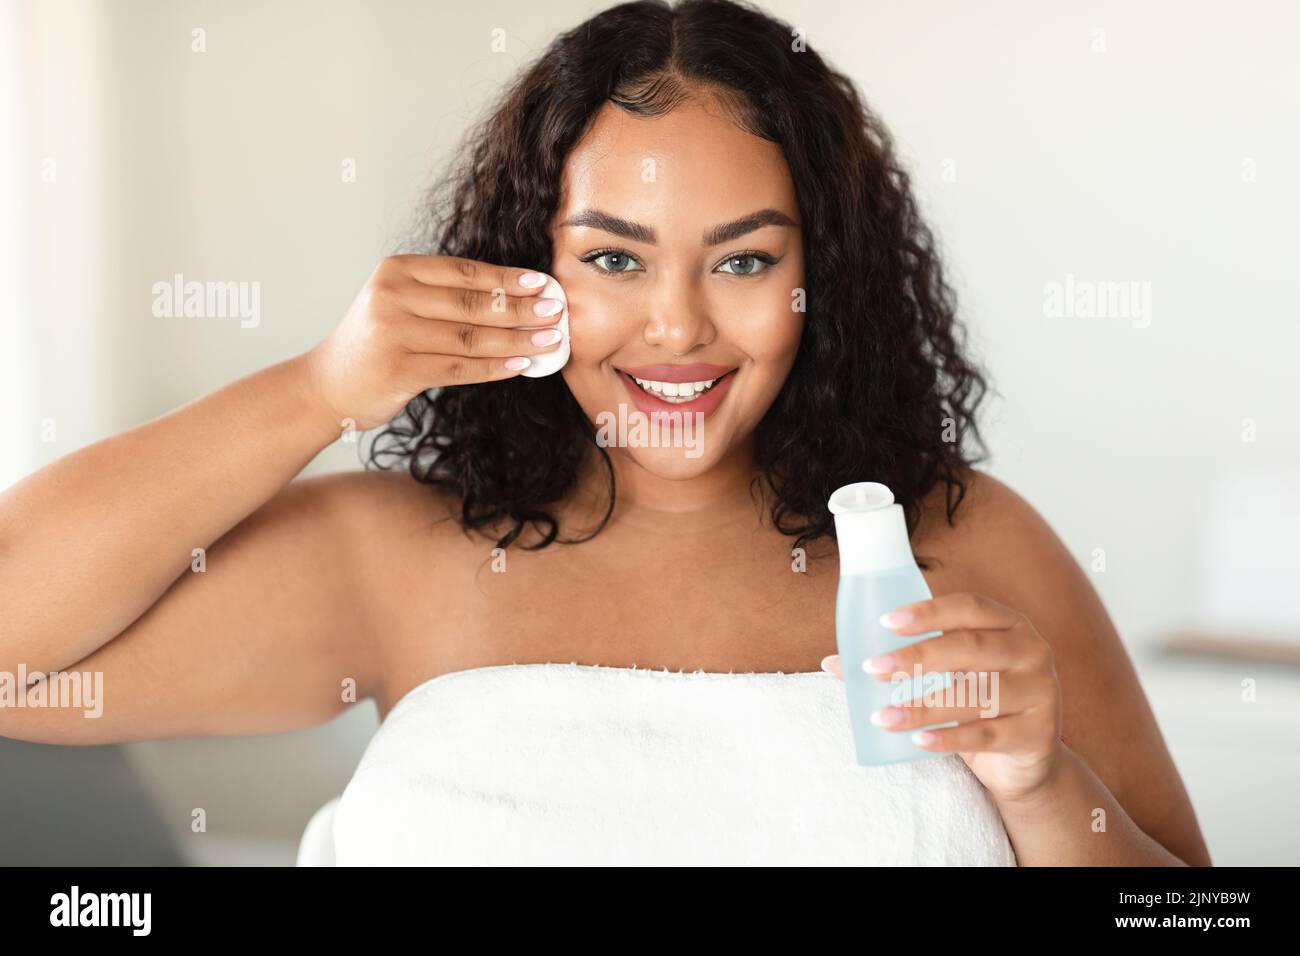 Skin cleansing concept. Happy black bodypositive lady using micellar water and cotton pad, making daily skincare routine Stock Photo